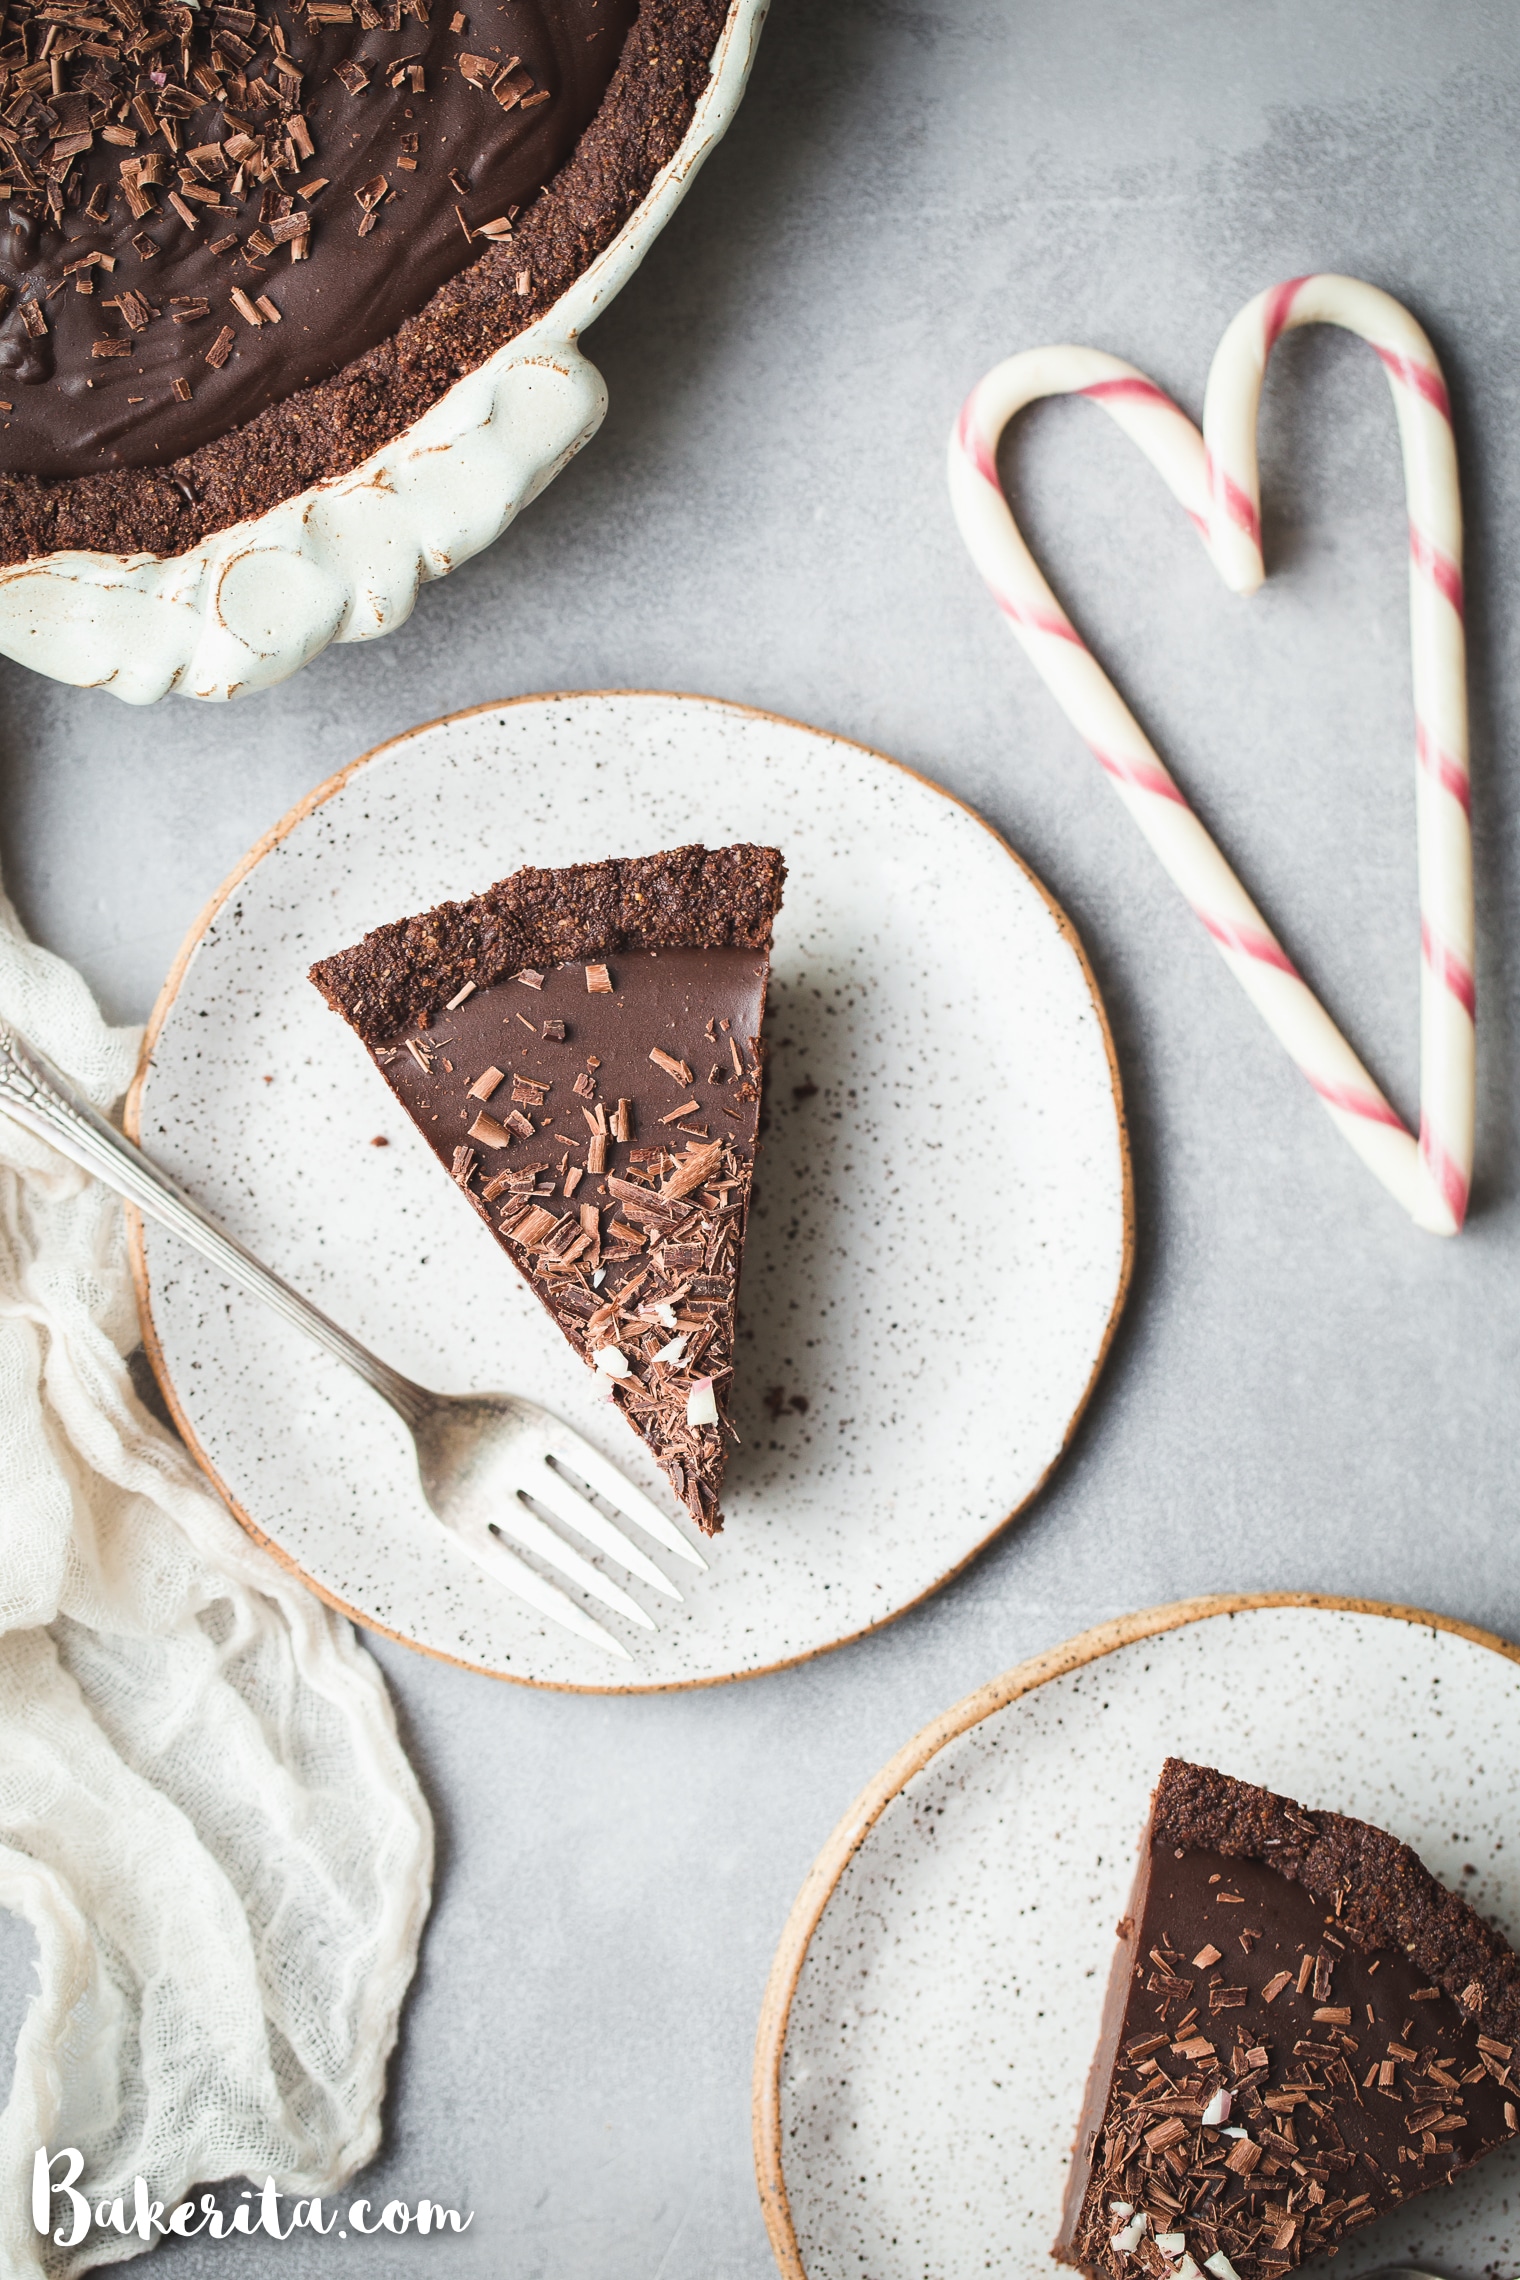 This Gluten-Free Vegan Chocolate Peppermint Pie makes for the best holiday dessert! With just SIX ingredients, it's simple to make and irresistibly delicious.